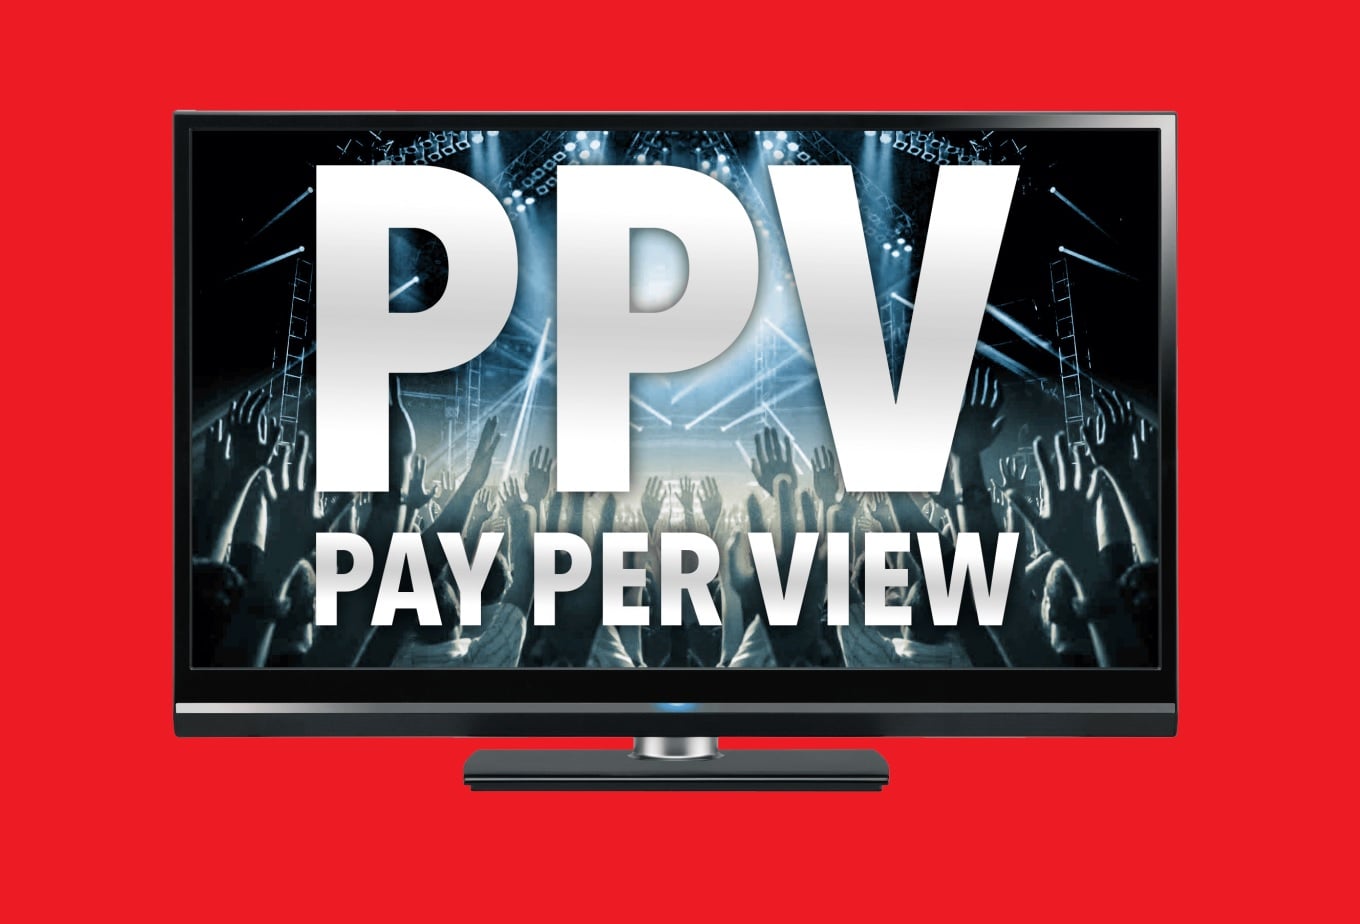 How to use pay per view